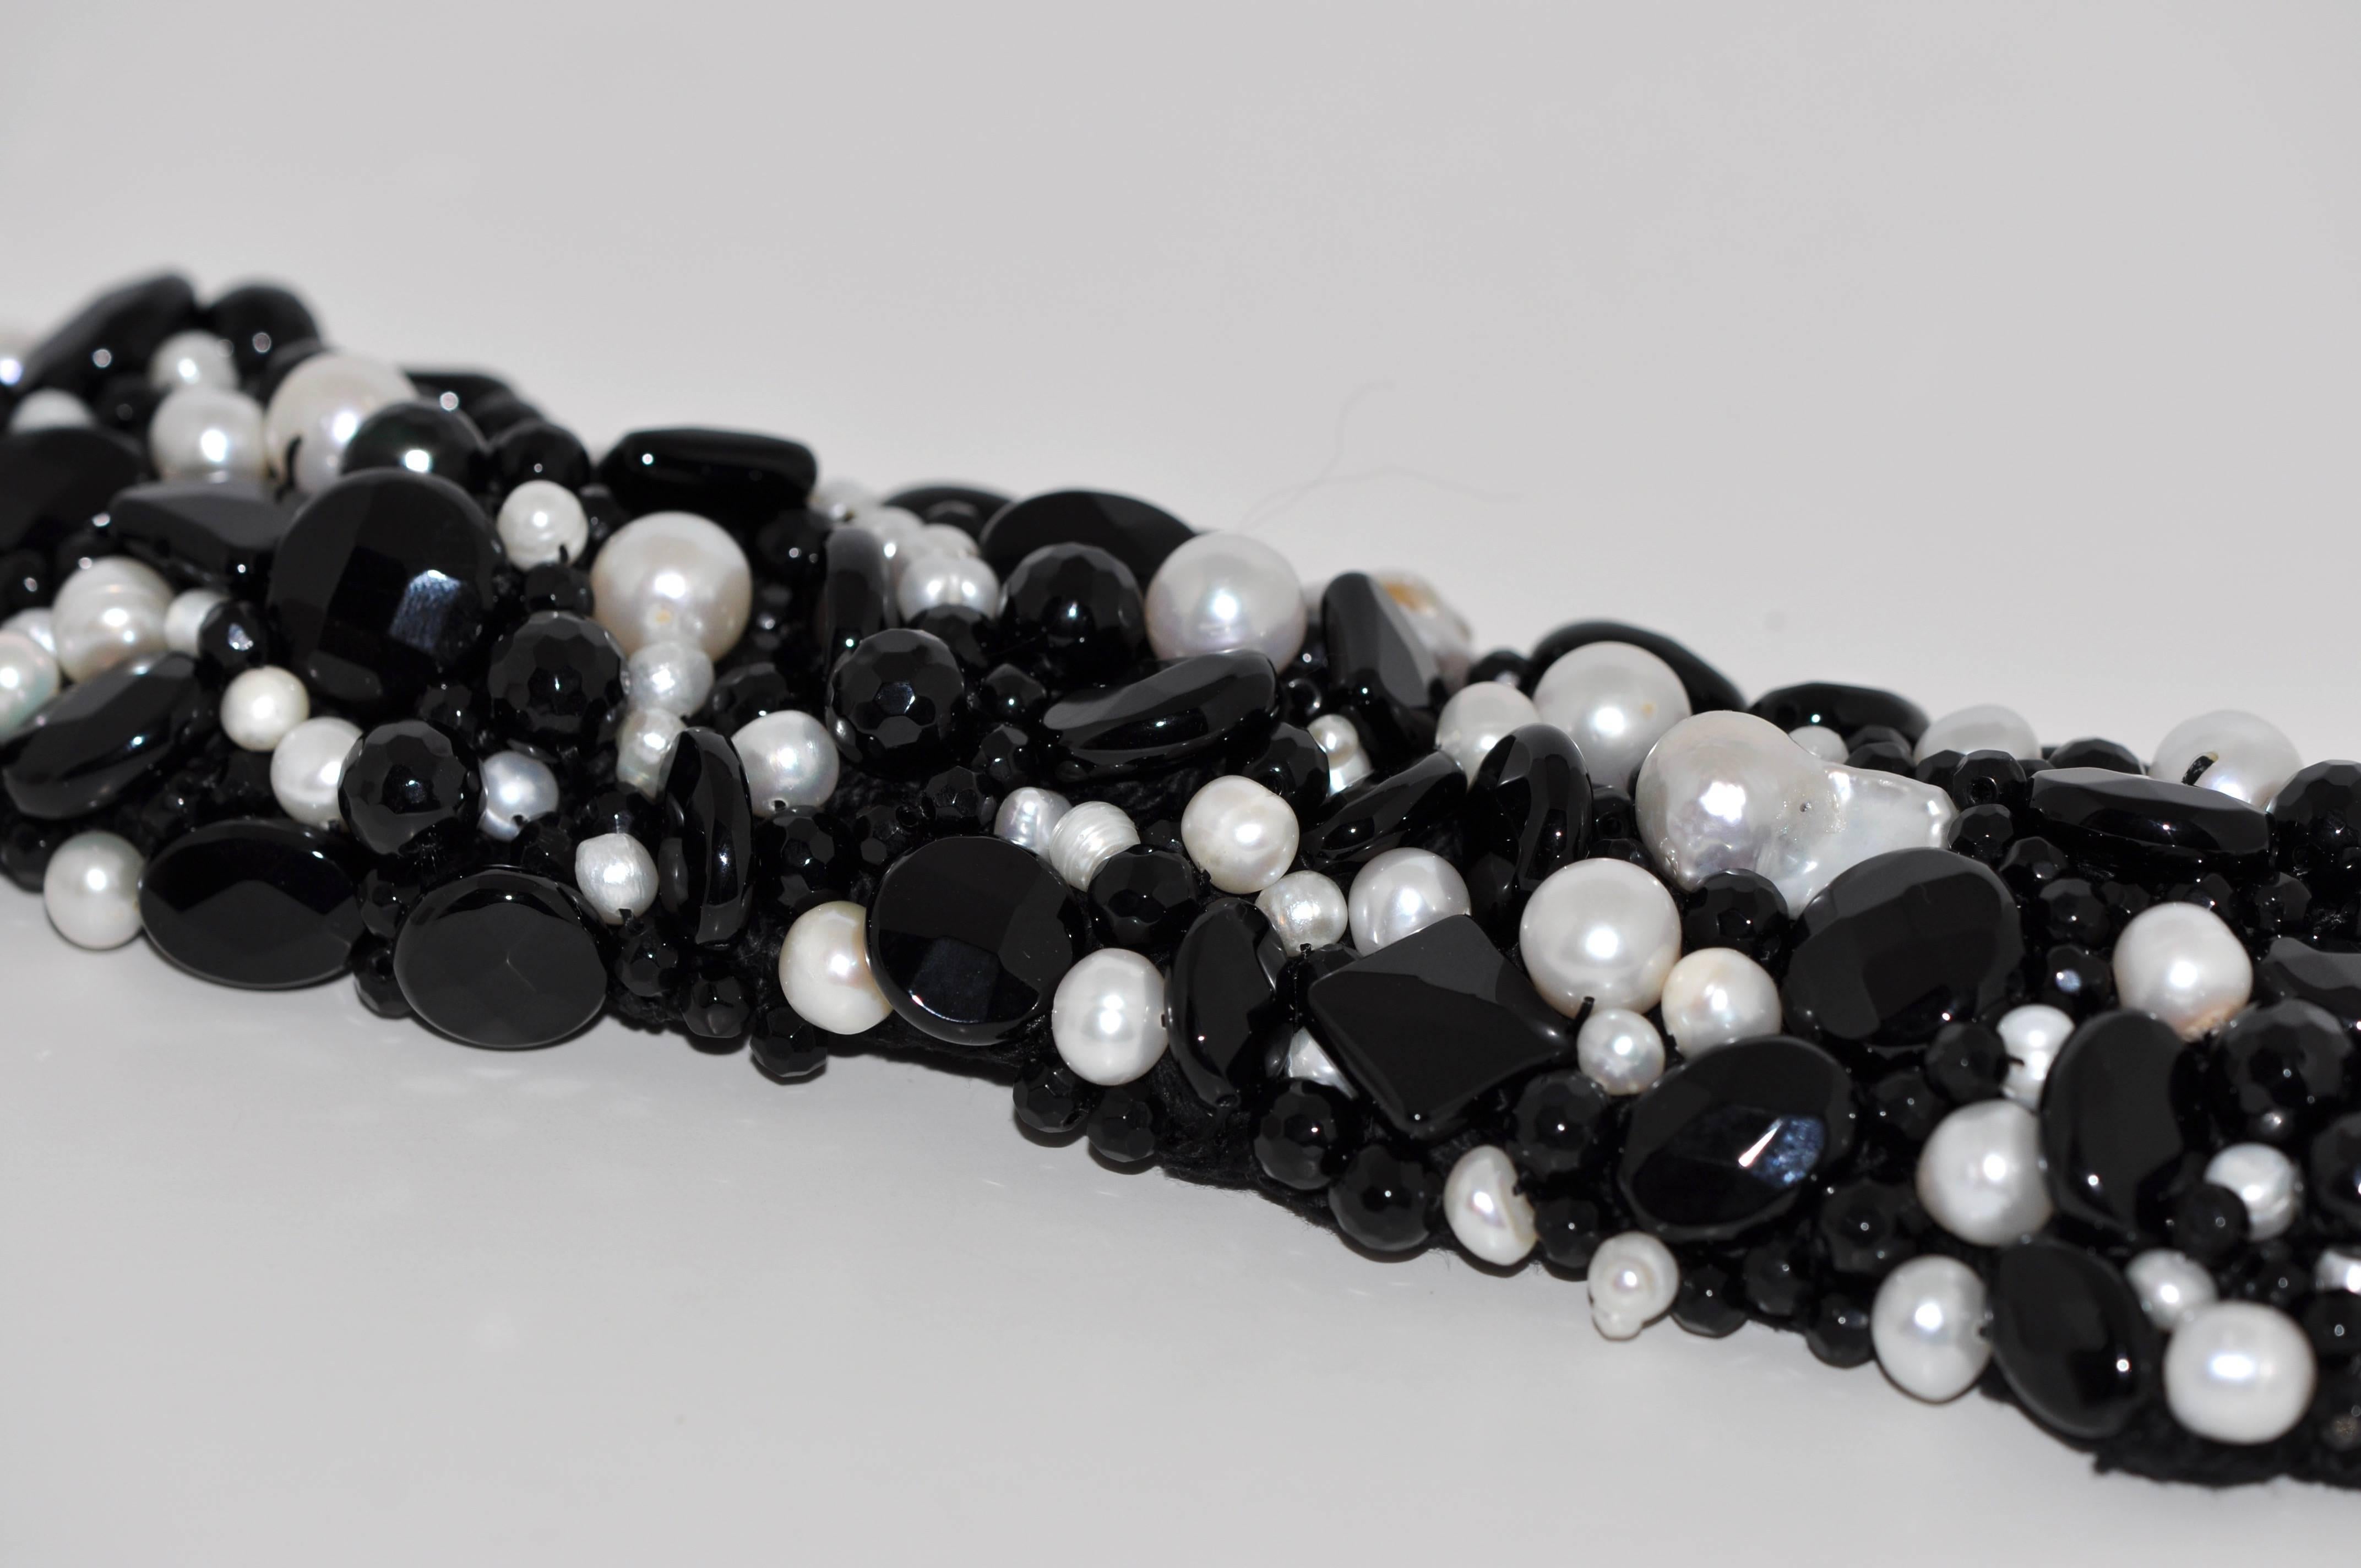 Discover this Onyx and Freshwater Pearls Artisanal Cuff Bracelet.
Onyx 
Freshwater Pearls
This Cuff Bracelet is handmade.